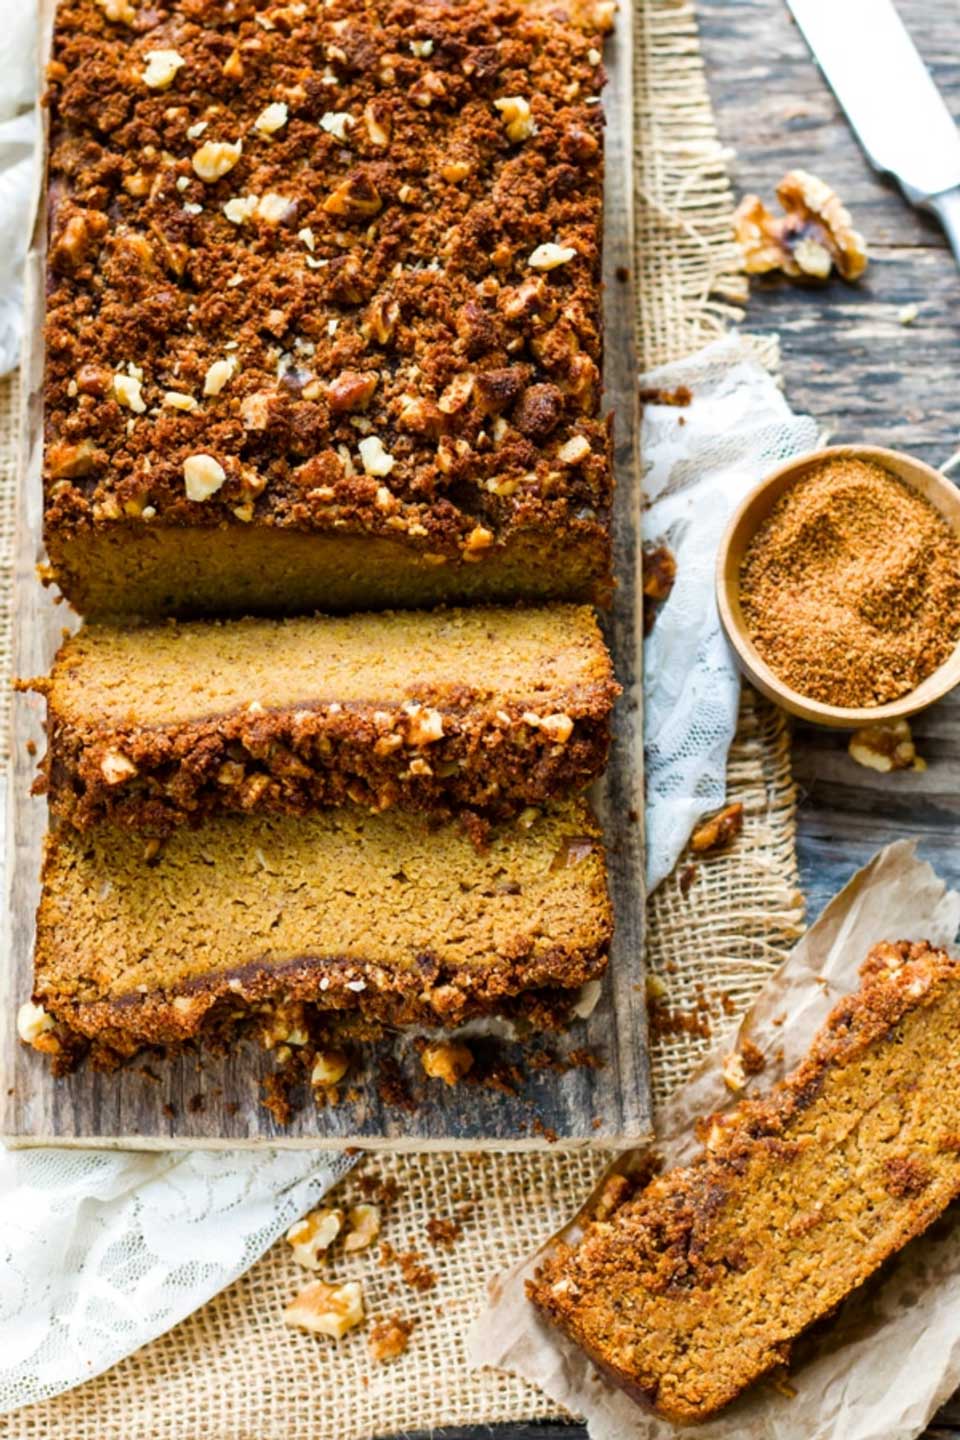 Healthier but so decadently delicious! Creative pumpkin bread recipes, from gluten free pumpkin bread to whole wheat, paleo to sugar free! Whatever “healthy” means to you, we’re sharing 15 of the very best pumpkin breads we could find! Bake one up today, and your pumpkin spice latte will never be lonely again! | pumpkin recipes | pumpkin bread healthy | gluten free | grain free | paleo | whole wheat | refined sugar free | dairy free | #healthyrecipes #pumpkin #bread | www.TwoHealthyKitchens.com